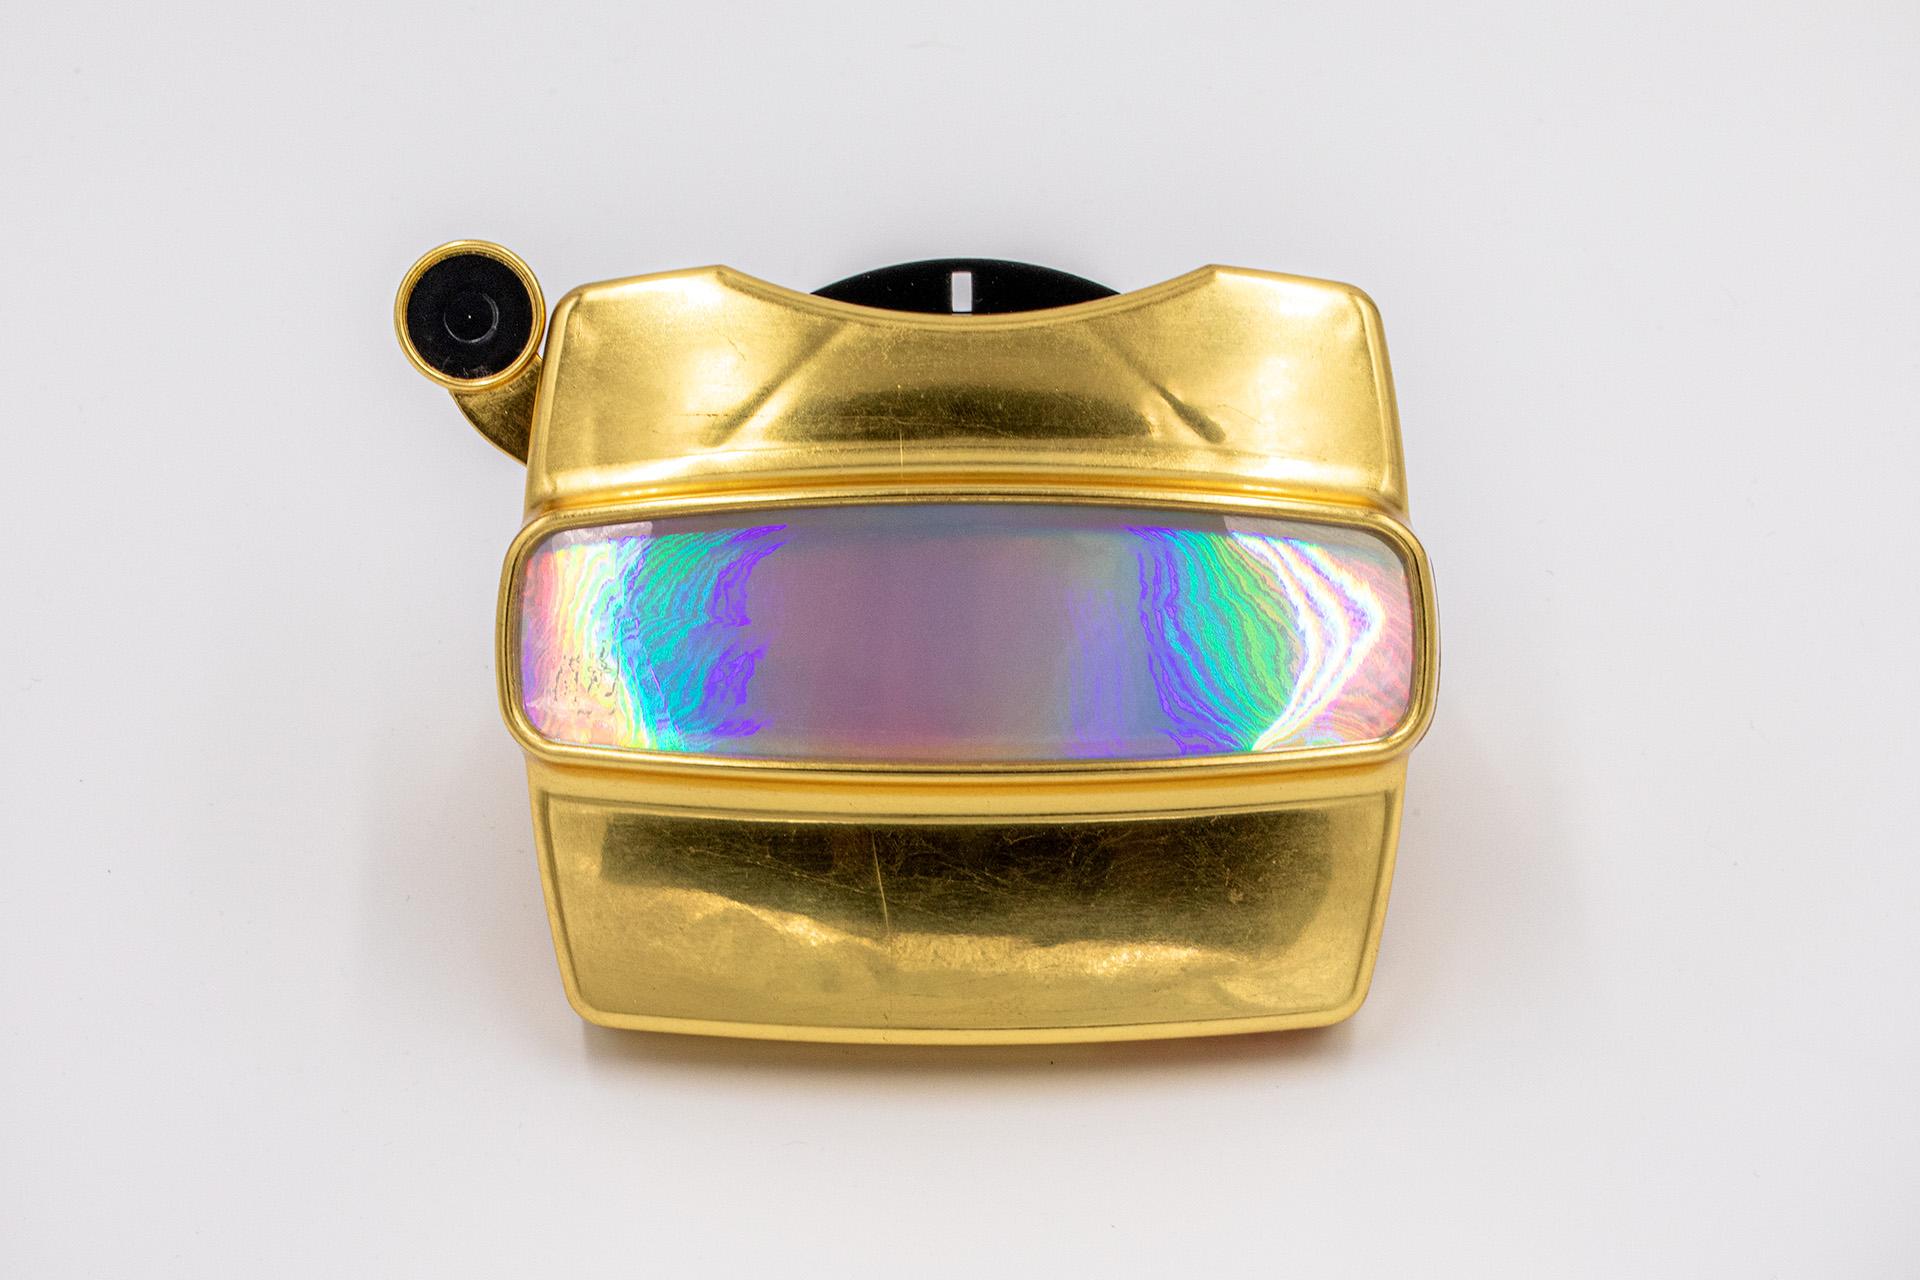 Mirror finish gold leaf over ABS thermoplastic viewer / Diffraction film diffuser

Kojun is an self-taught multimédia American artist born in 1977 based in Tokyo, Japan since 1999. Kojun project started in 2010 explores the experiences of beauty